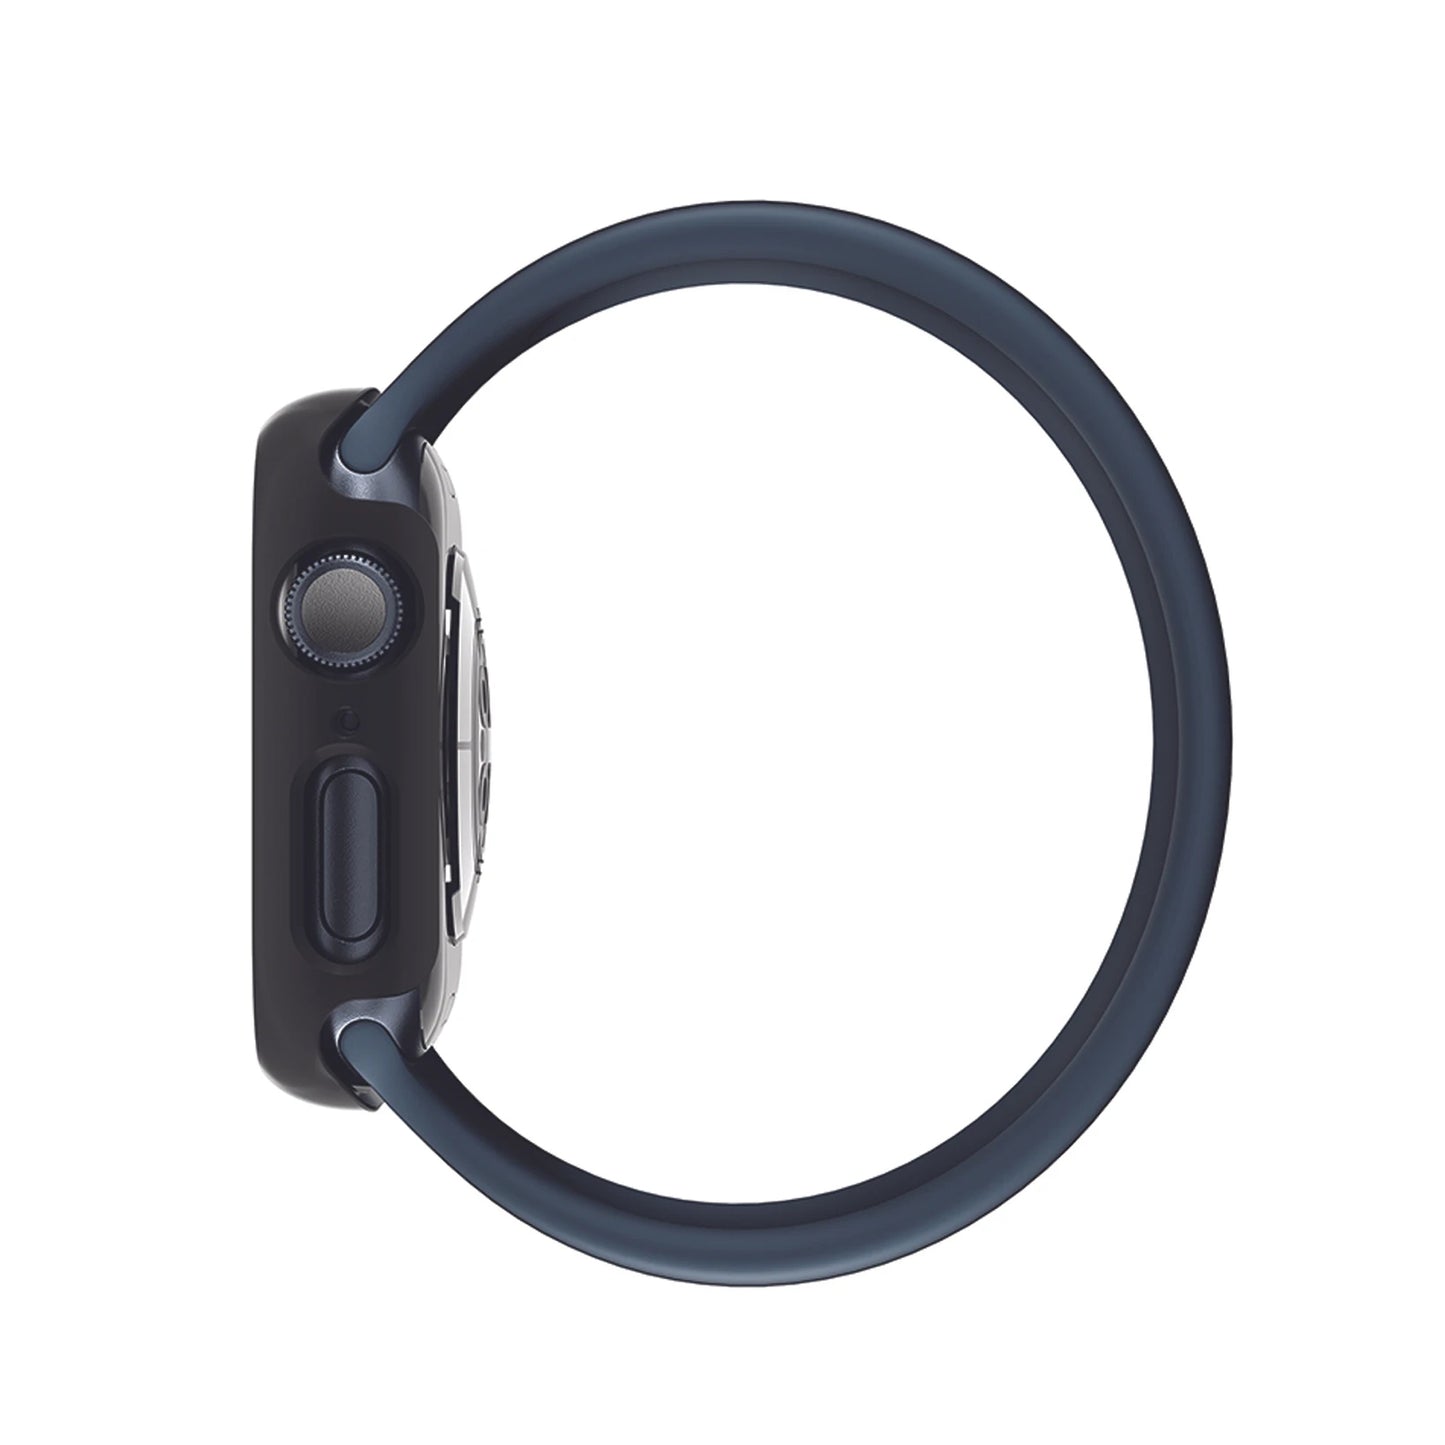 AMAZINGthing Marsix Case for Apple Watch Series 7 ( 41mm ) - Drop Proof - Clear (Barcode: 4892878070546 )